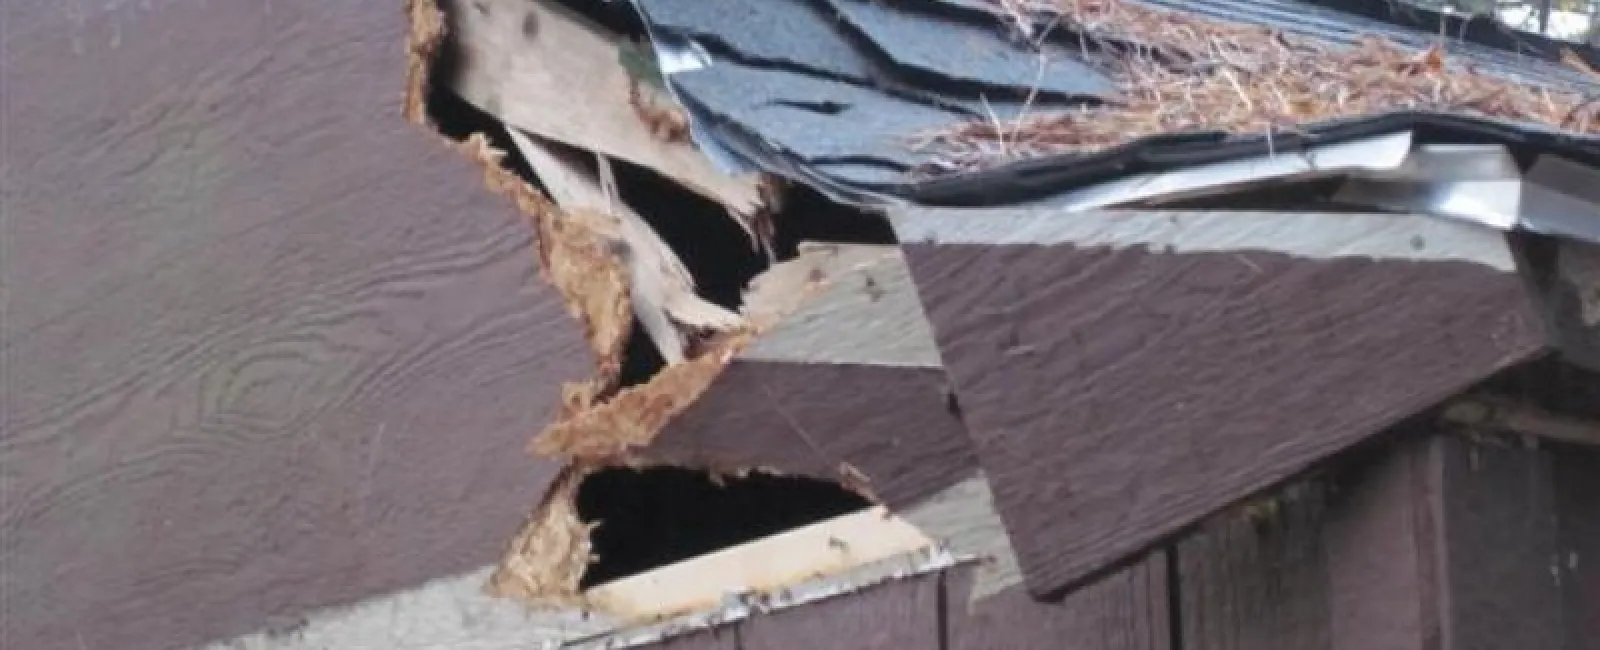 Prevent roof damage from wind